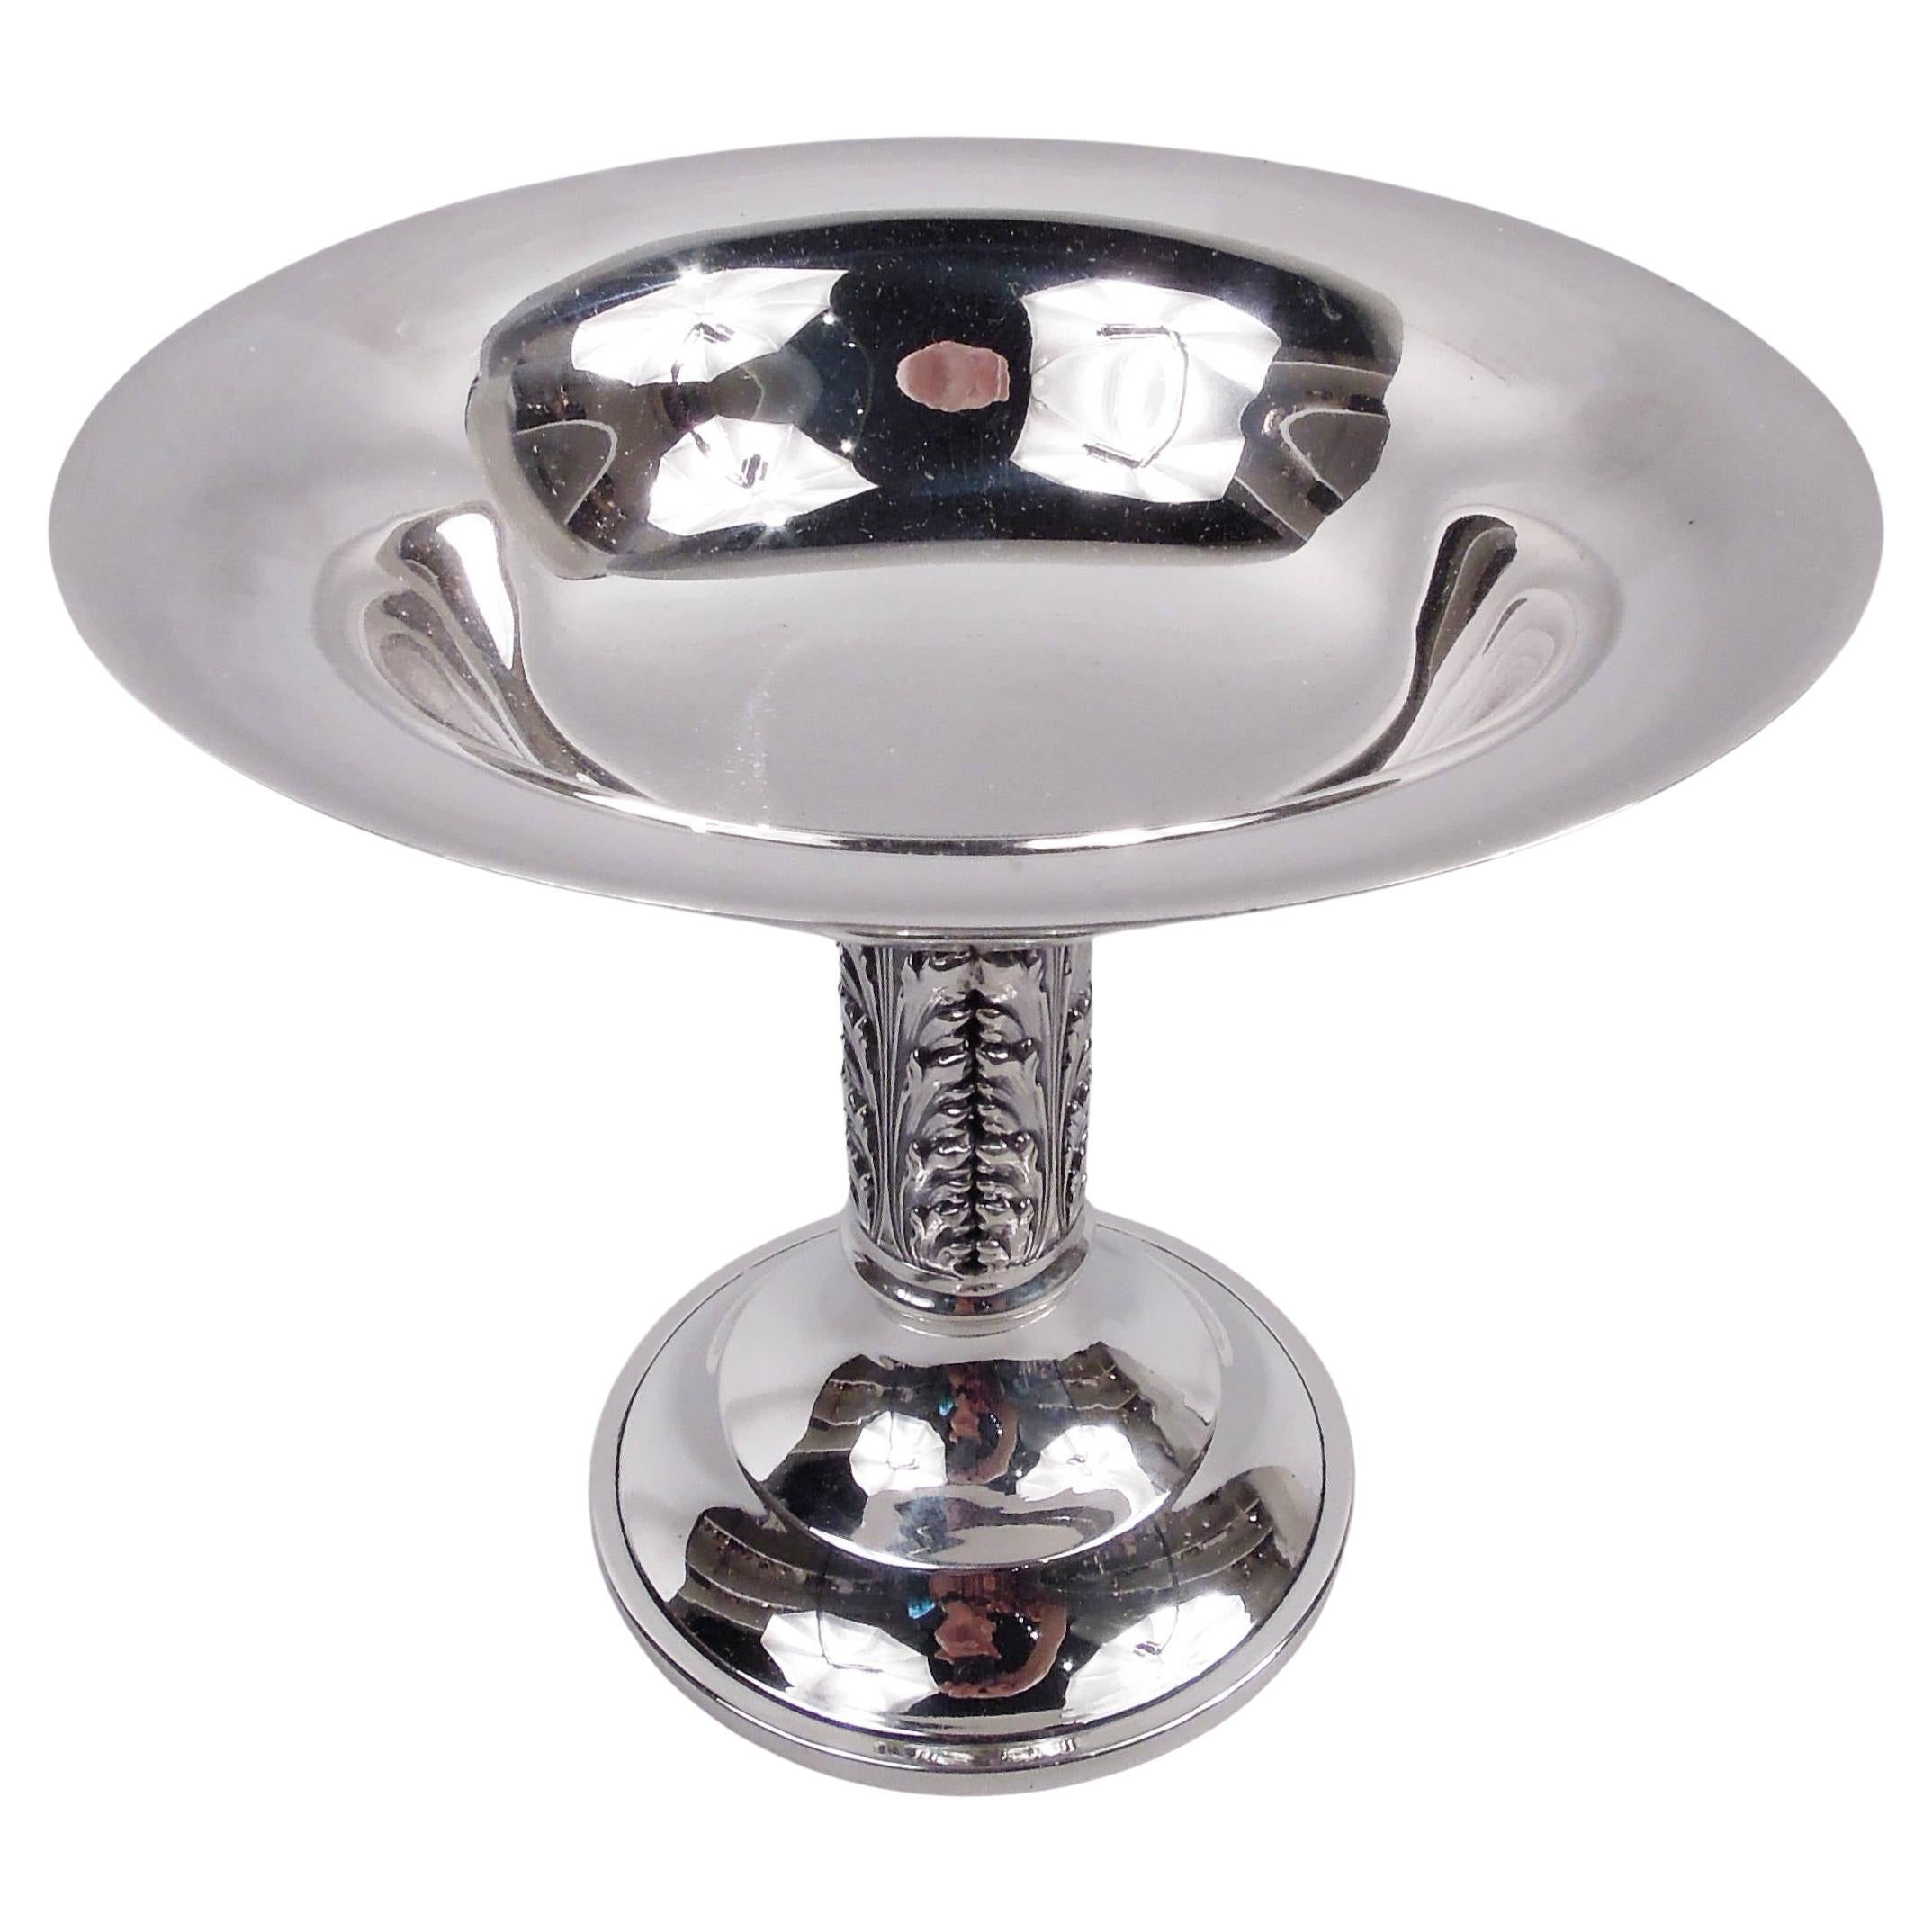 American Midcentury Modern Danish-Style Sterling Silver Compote For Sale